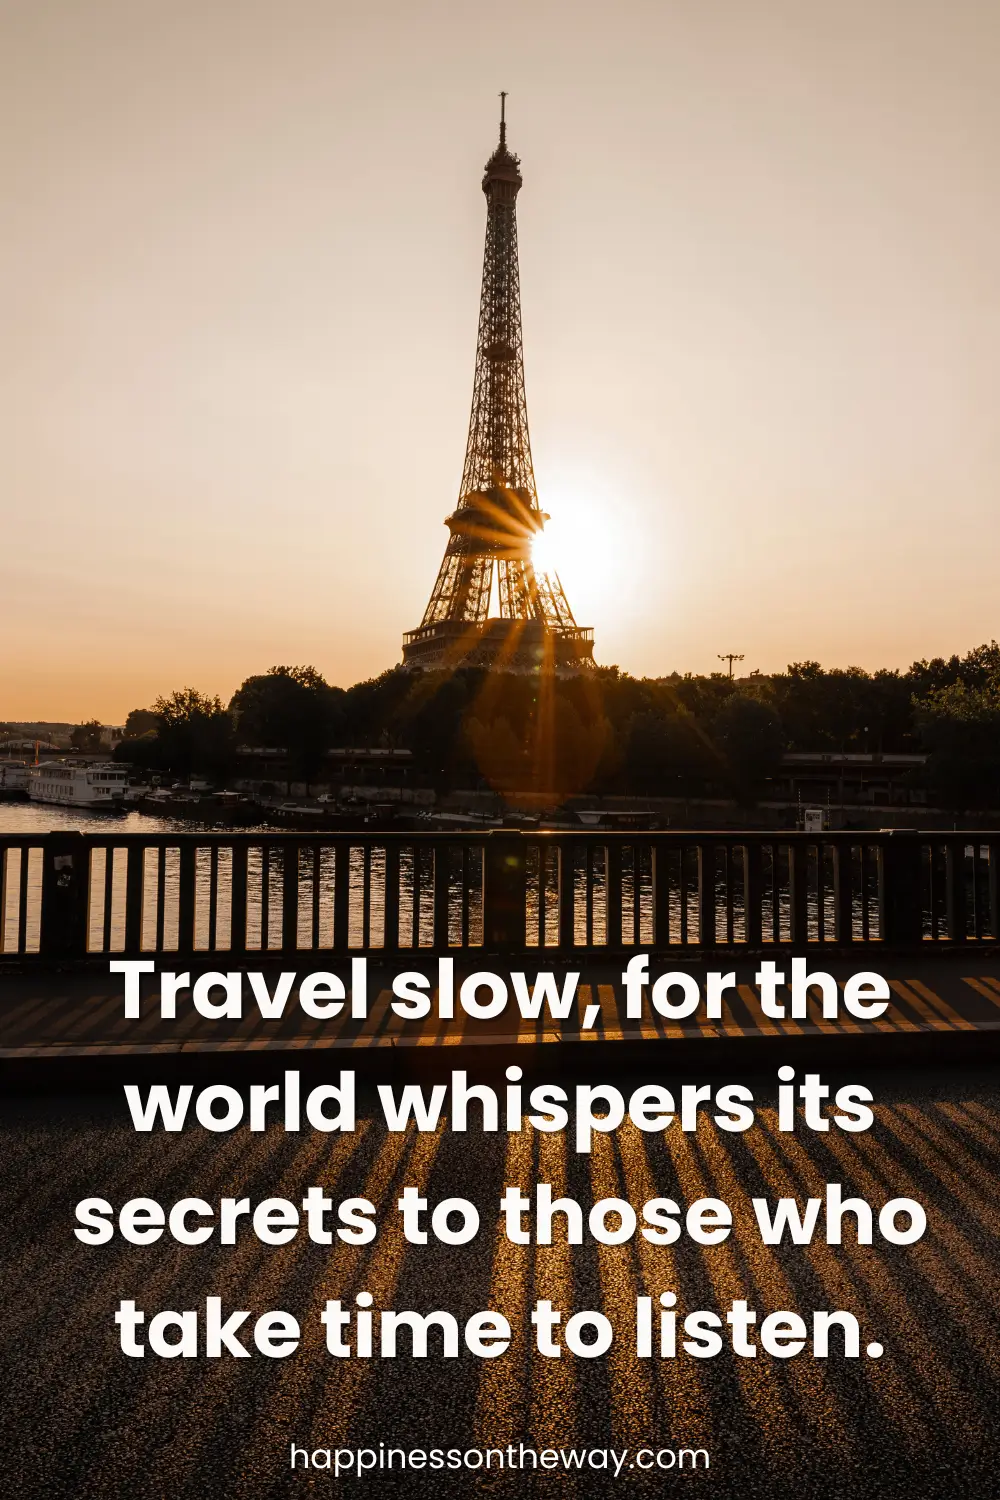 Sunrise behind the Eiffel Tower in Paris, seen through the silhouette of a bridge railing, with the inspiring slow travel quote 'Travel slow, for the world whispers its secrets to those who take time to listen.'